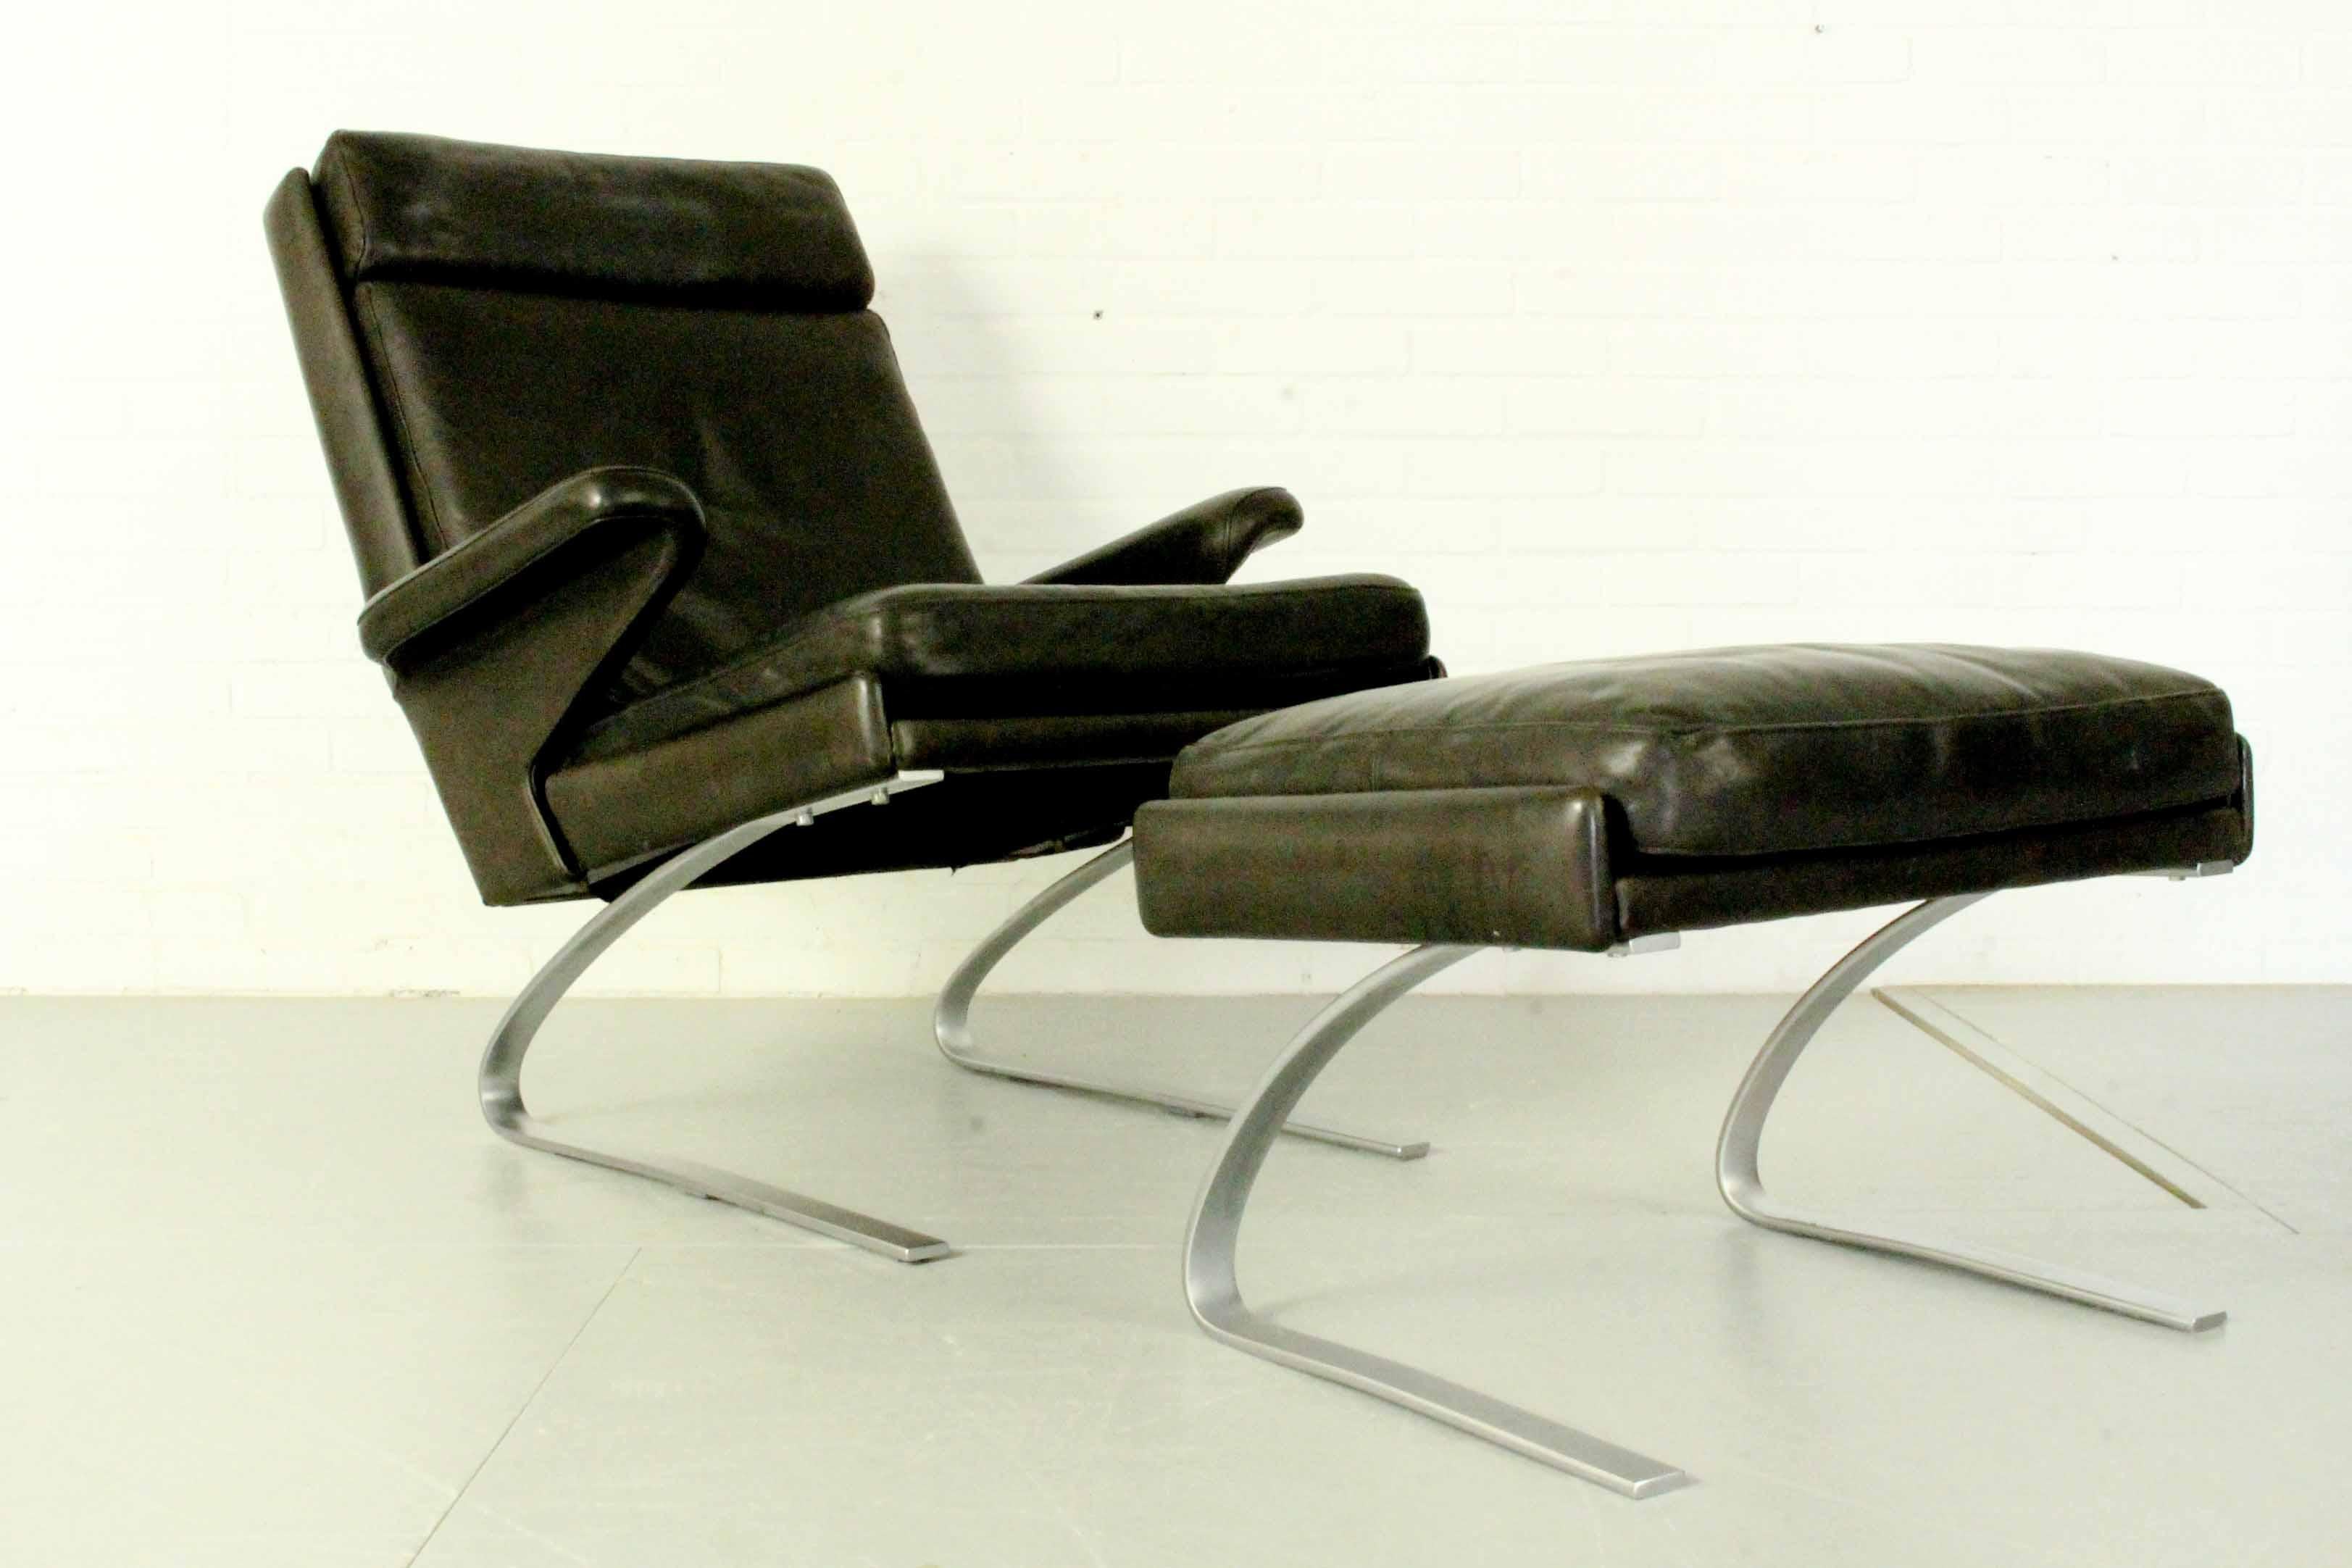 Swing lounge chair with ottoman designed by Reinhold Adolf and Hans-Jürgen Schröpfer for COR Germany. This set is fully original with black leather patinated by age and use. Two sets of lounge chair + ottoman available. 

Price per set of 1 lounge